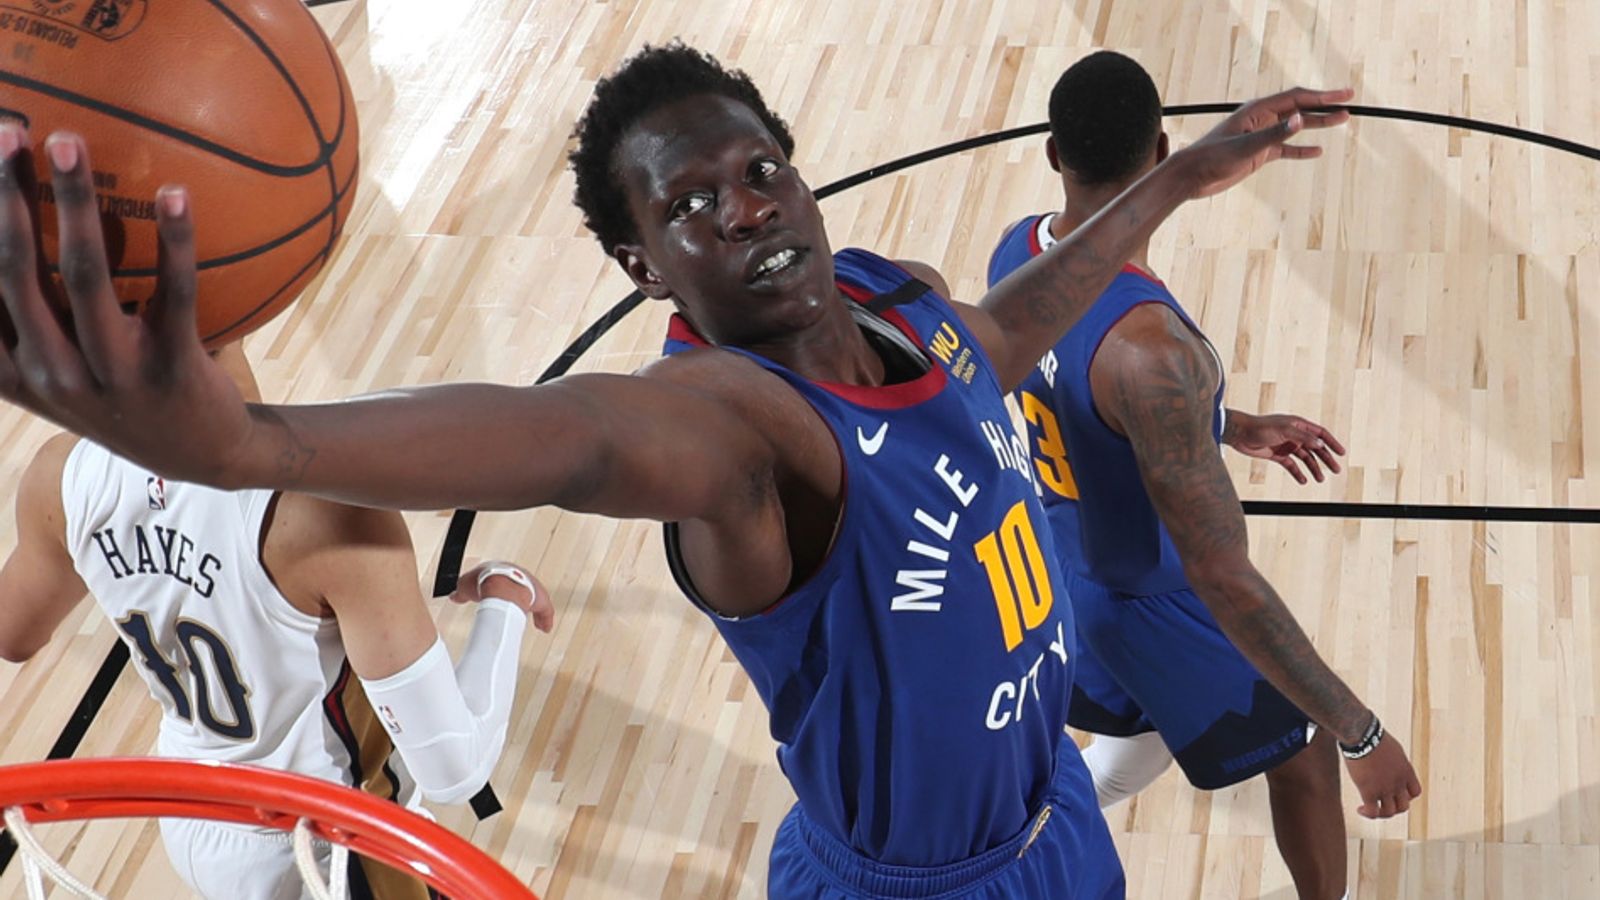 Meet Nuggets center Bol Bol, the most tantalizing player in the NBA